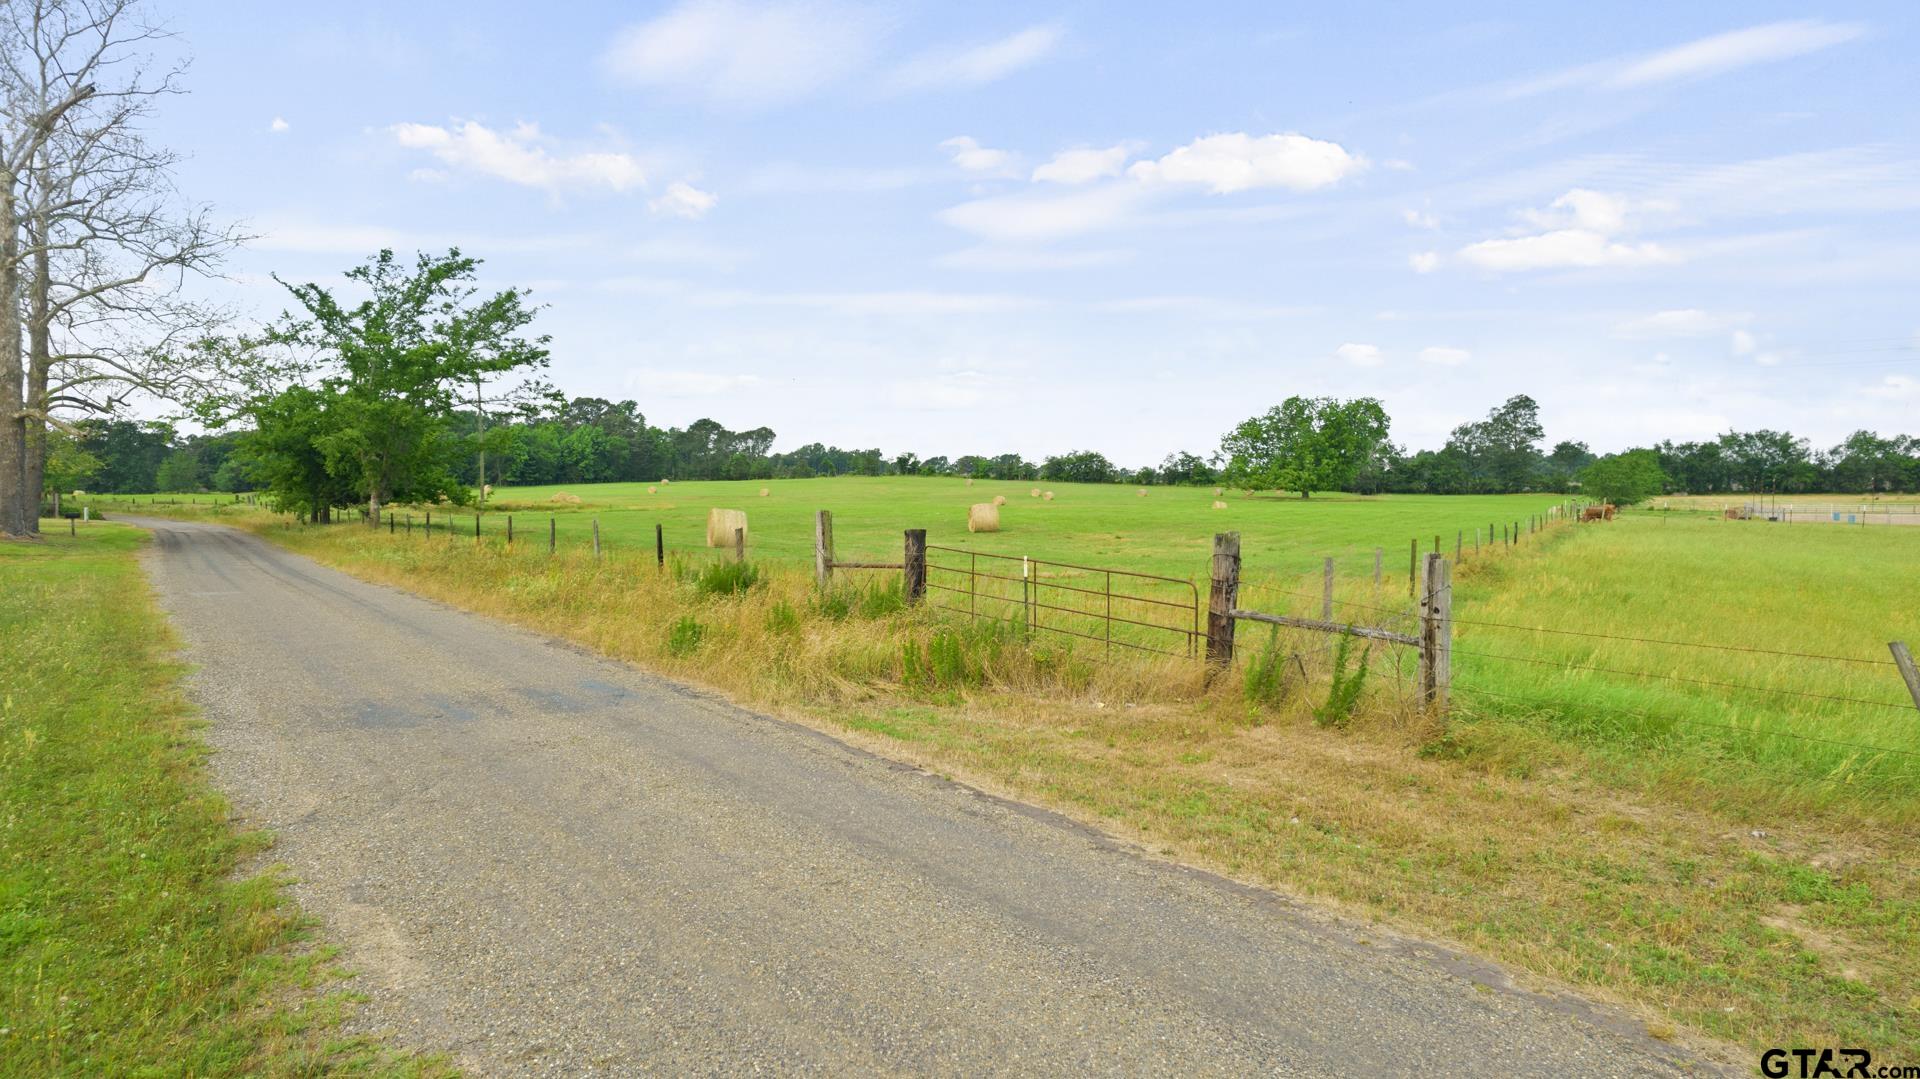 Looking for a wonderful homesite?  This rolling meadow has a beautiful hilltop view. small pond and completely fenced with 2 gated entries.  Currently used for hay production.  Not too far of the main road.  Beautiful Property.